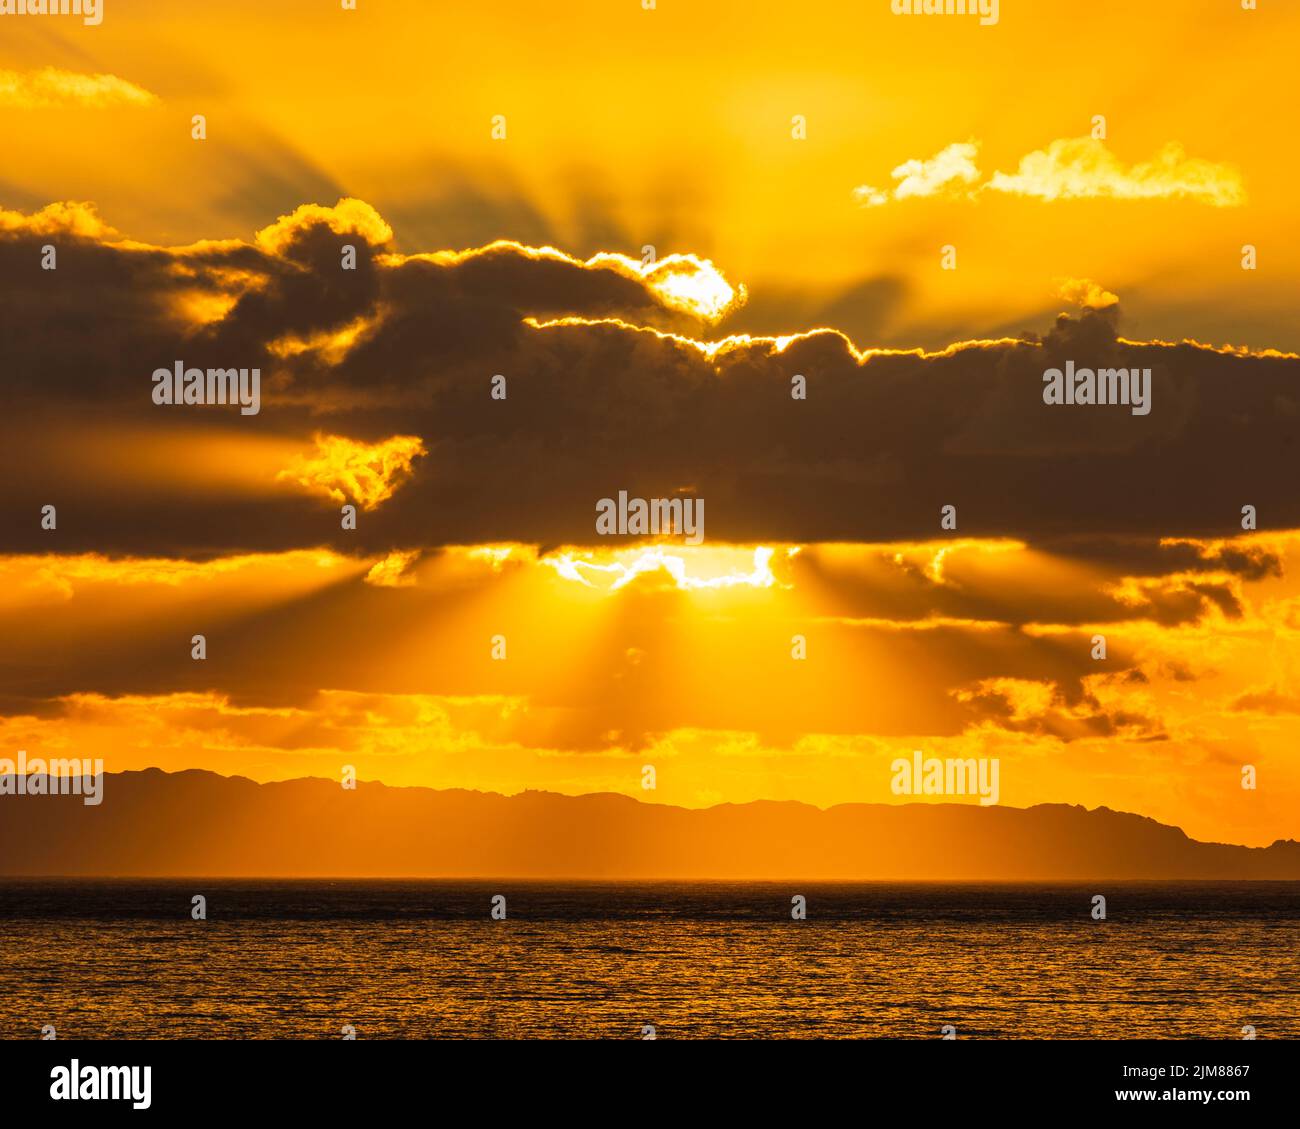 Sun behind clouds over sea Stock Photo